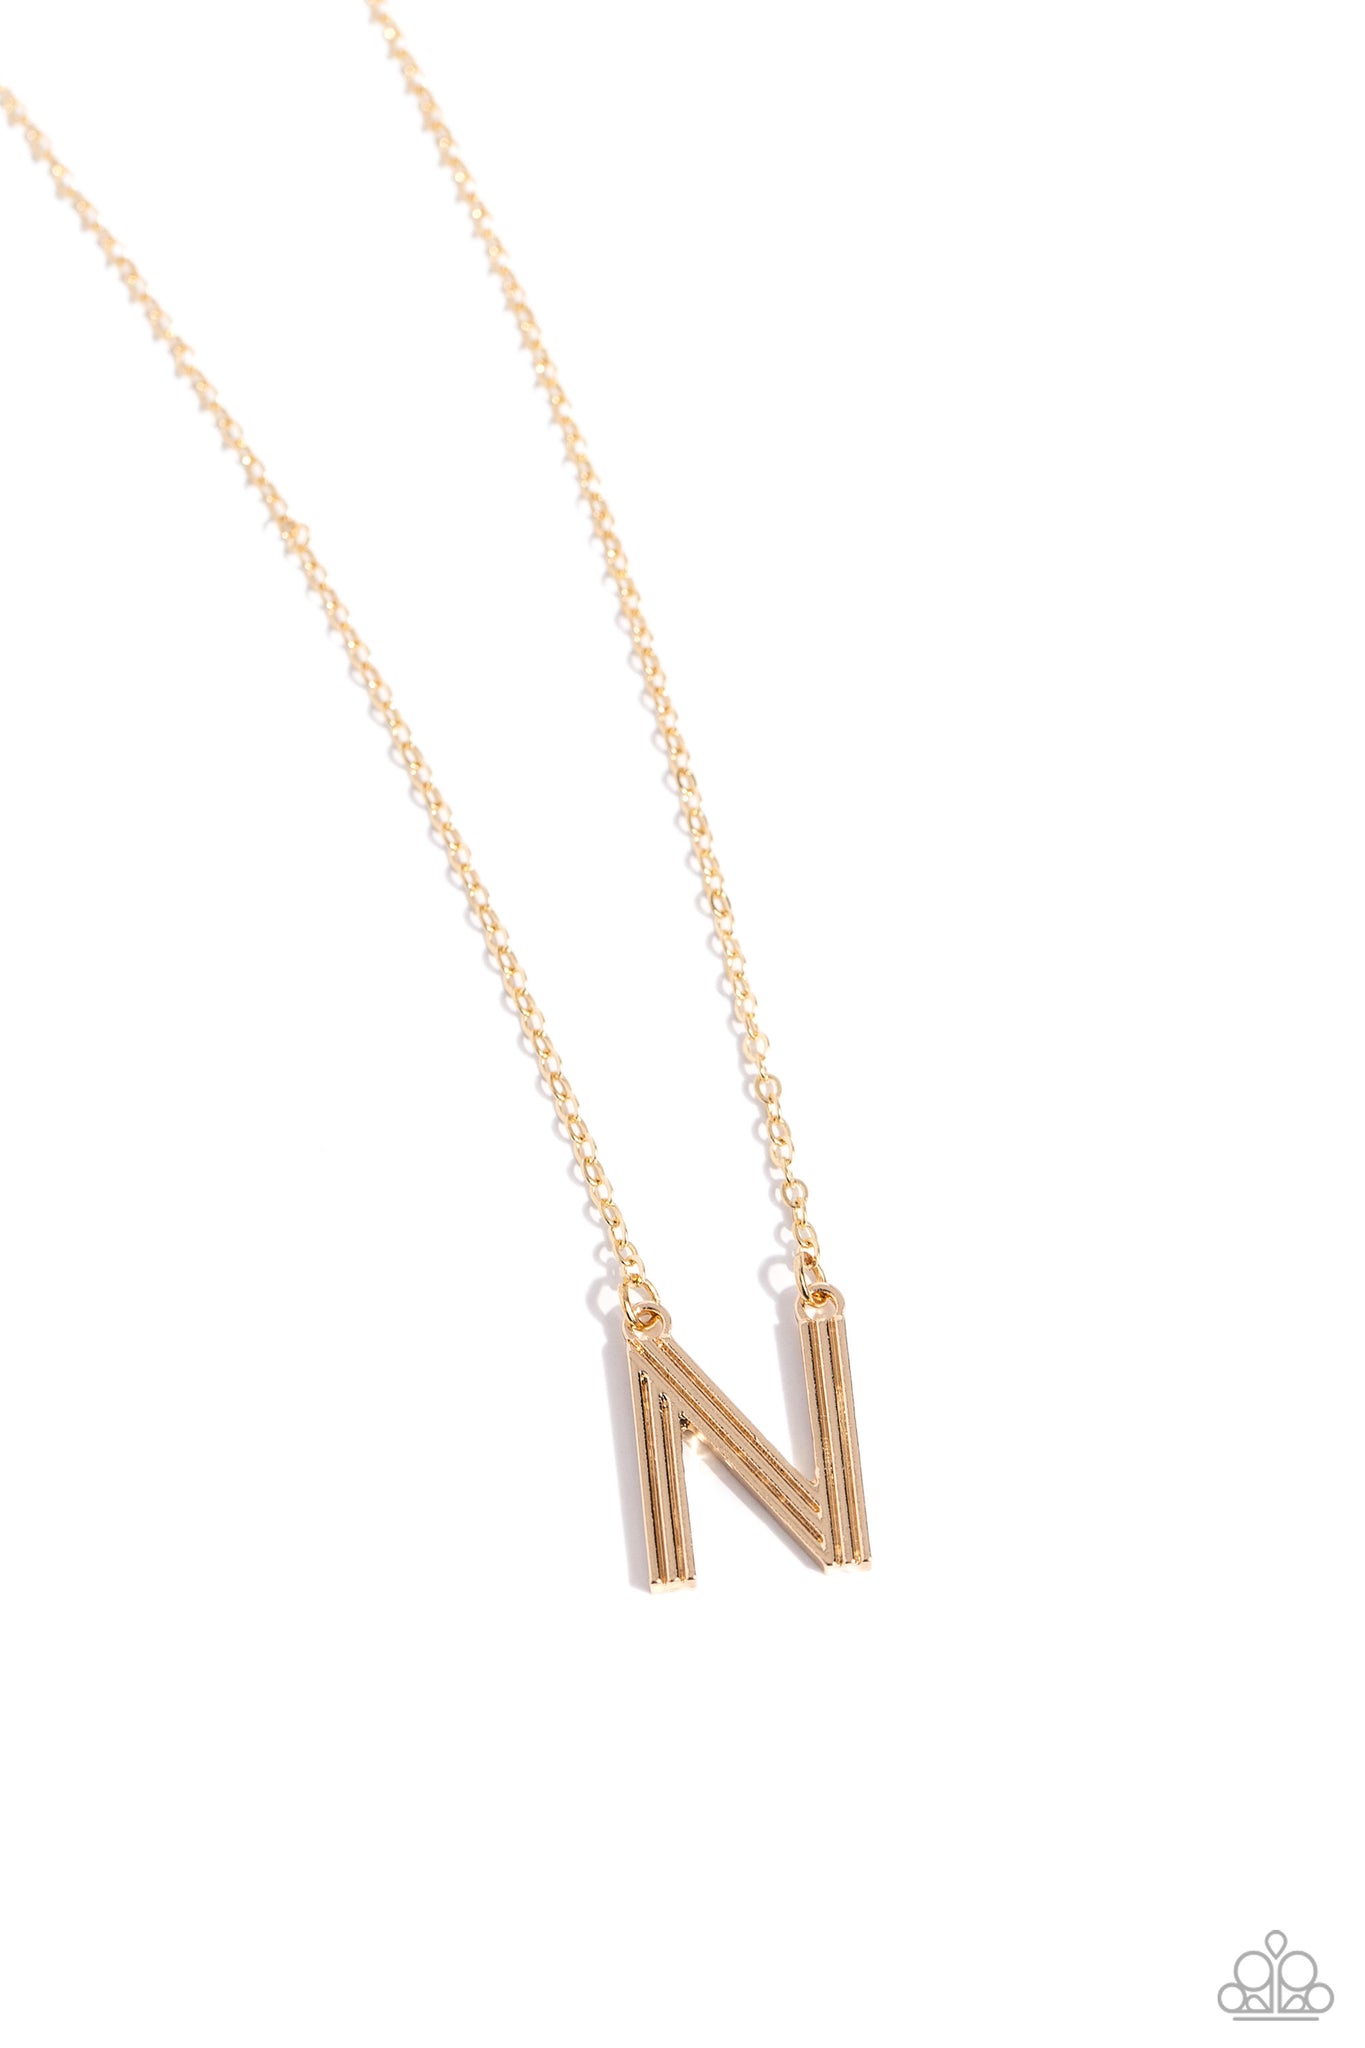 Paparazzi - Leave Your Initials - Gold - N Necklace